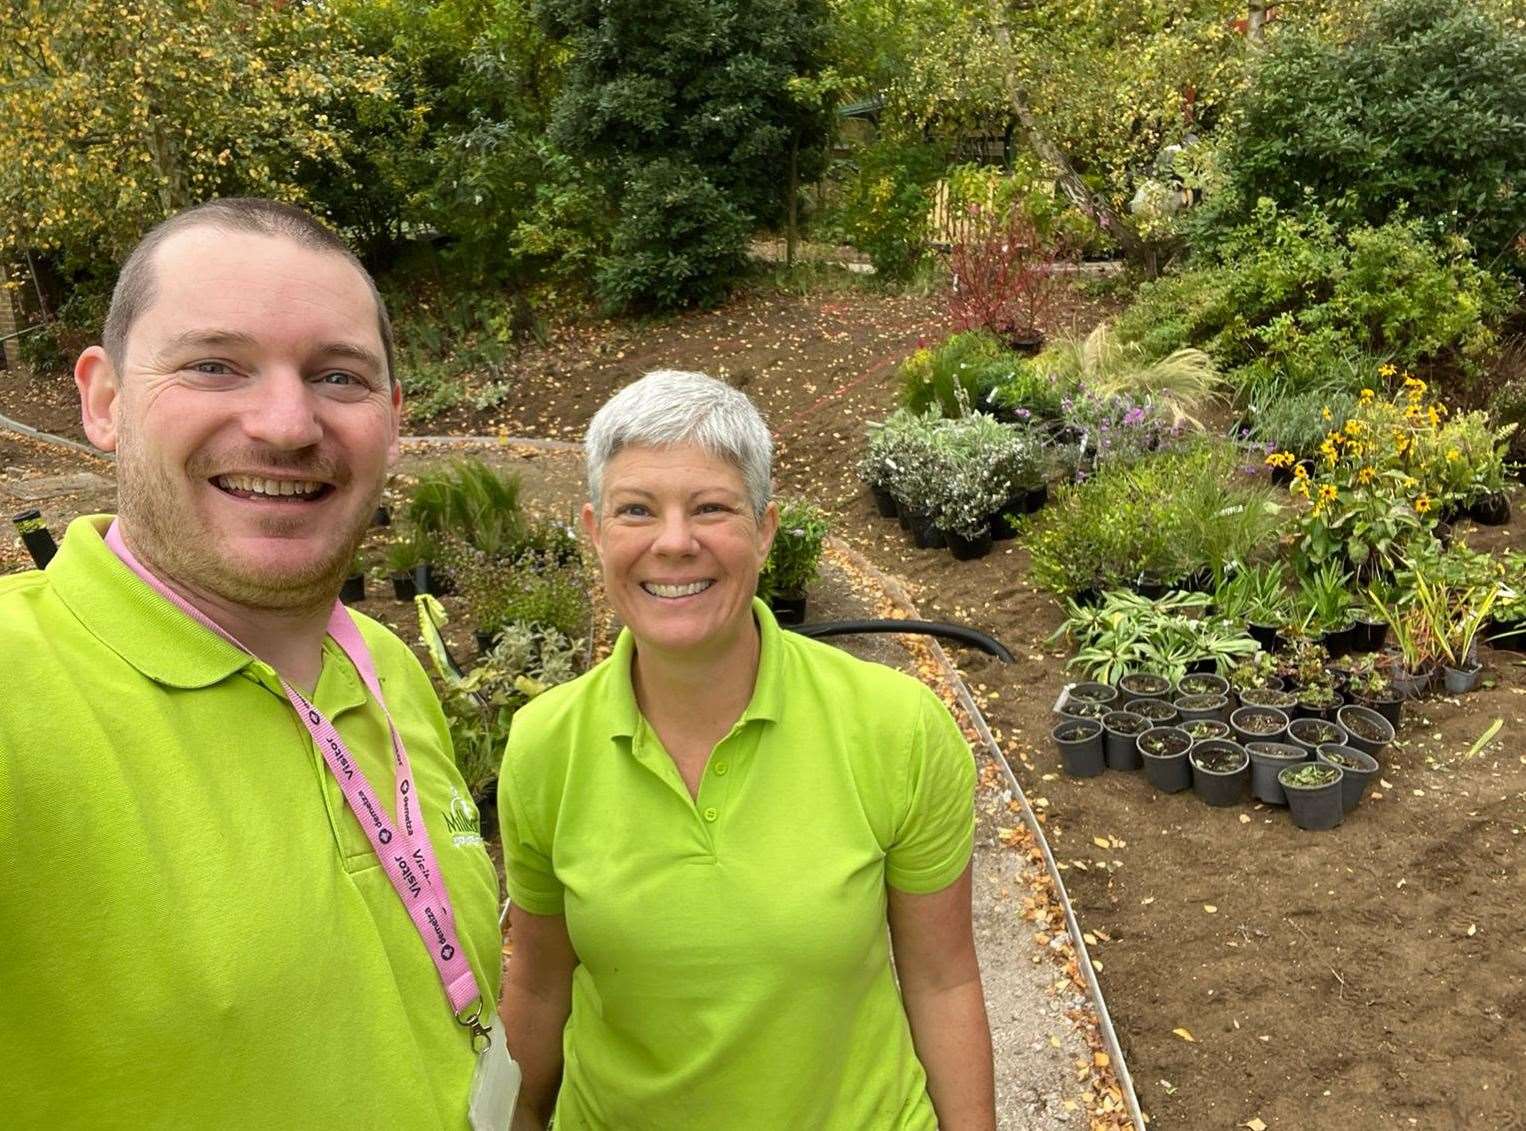 Millbrook’s Dan Stevens, Senior Plant Manager and Tammy Woodhouse, Managing Director, helping to plant the new garden at Demelza, Kent. Photo: Millbrook Garden Company